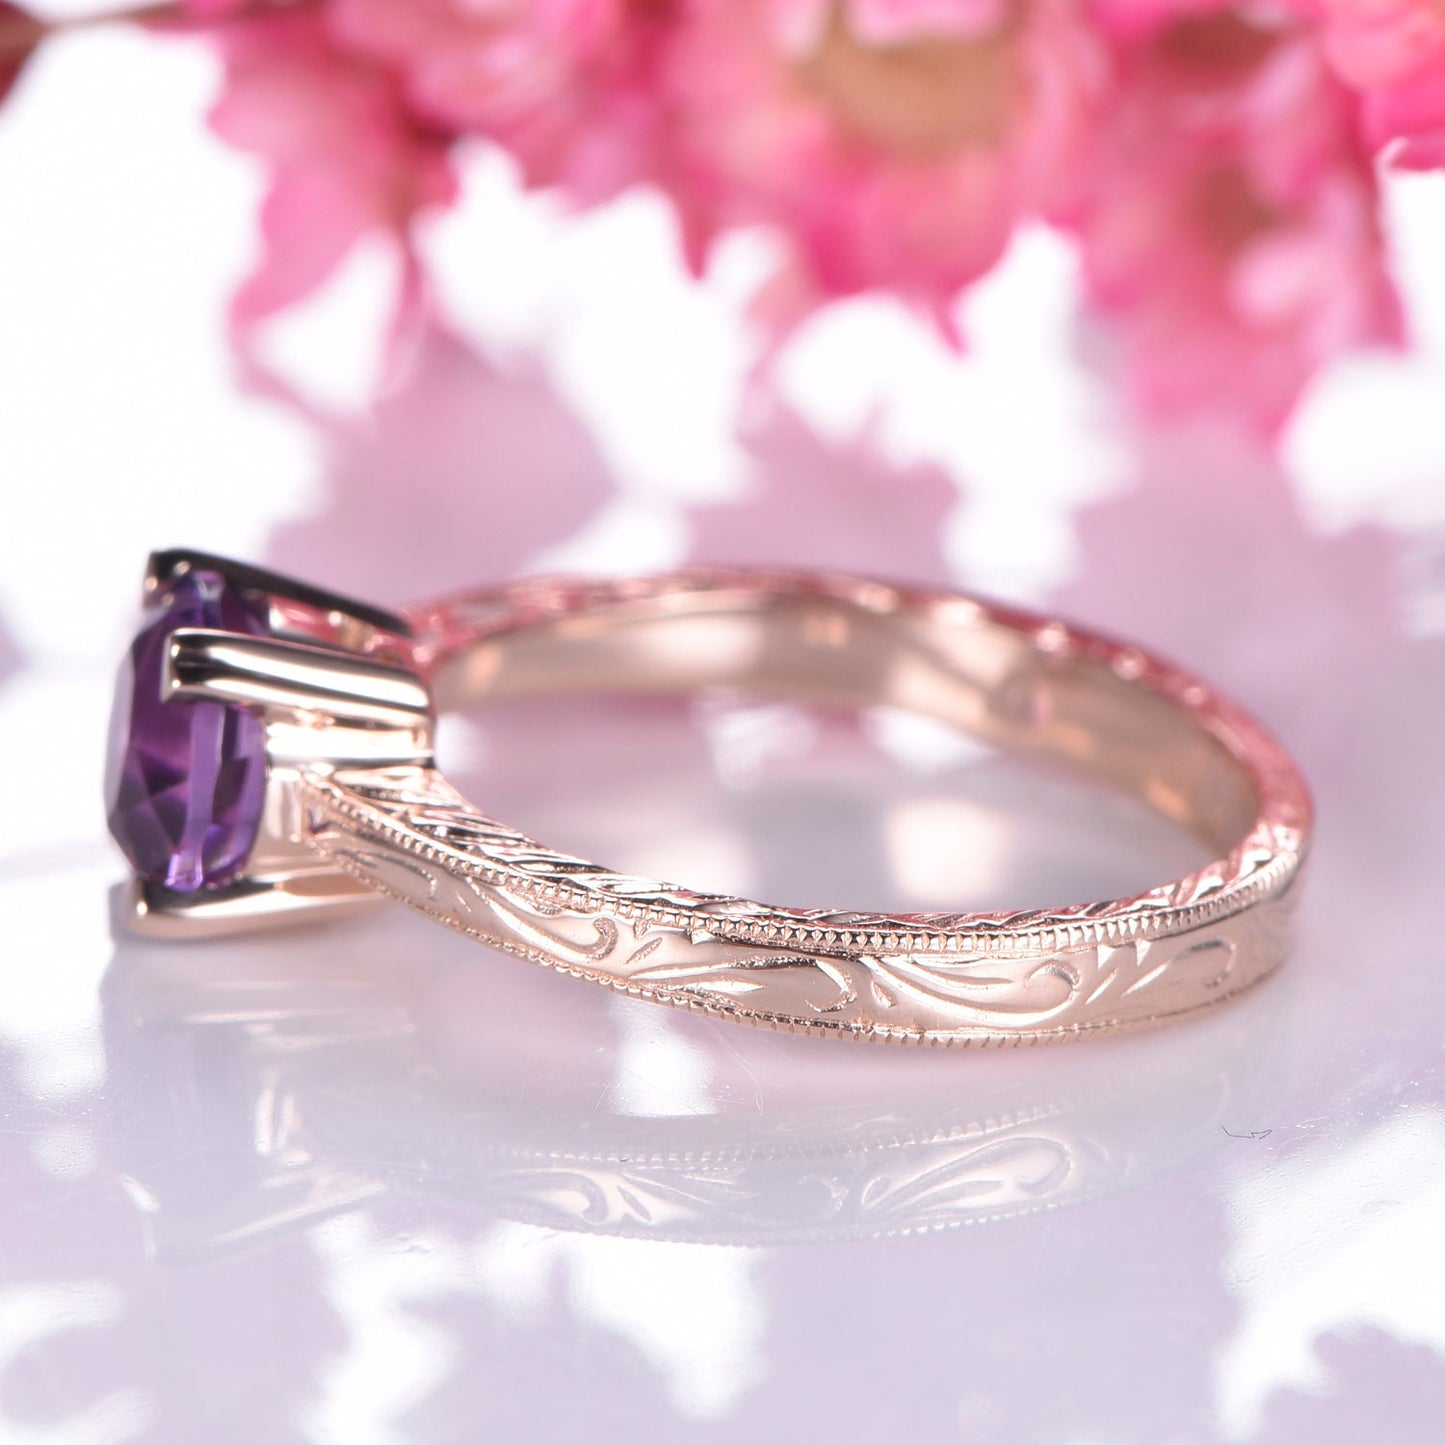 Amethyst engagement ring 14k rose gold filigree wedding band 6.5mm round cut IF natural birthstone plain gold band promise ring